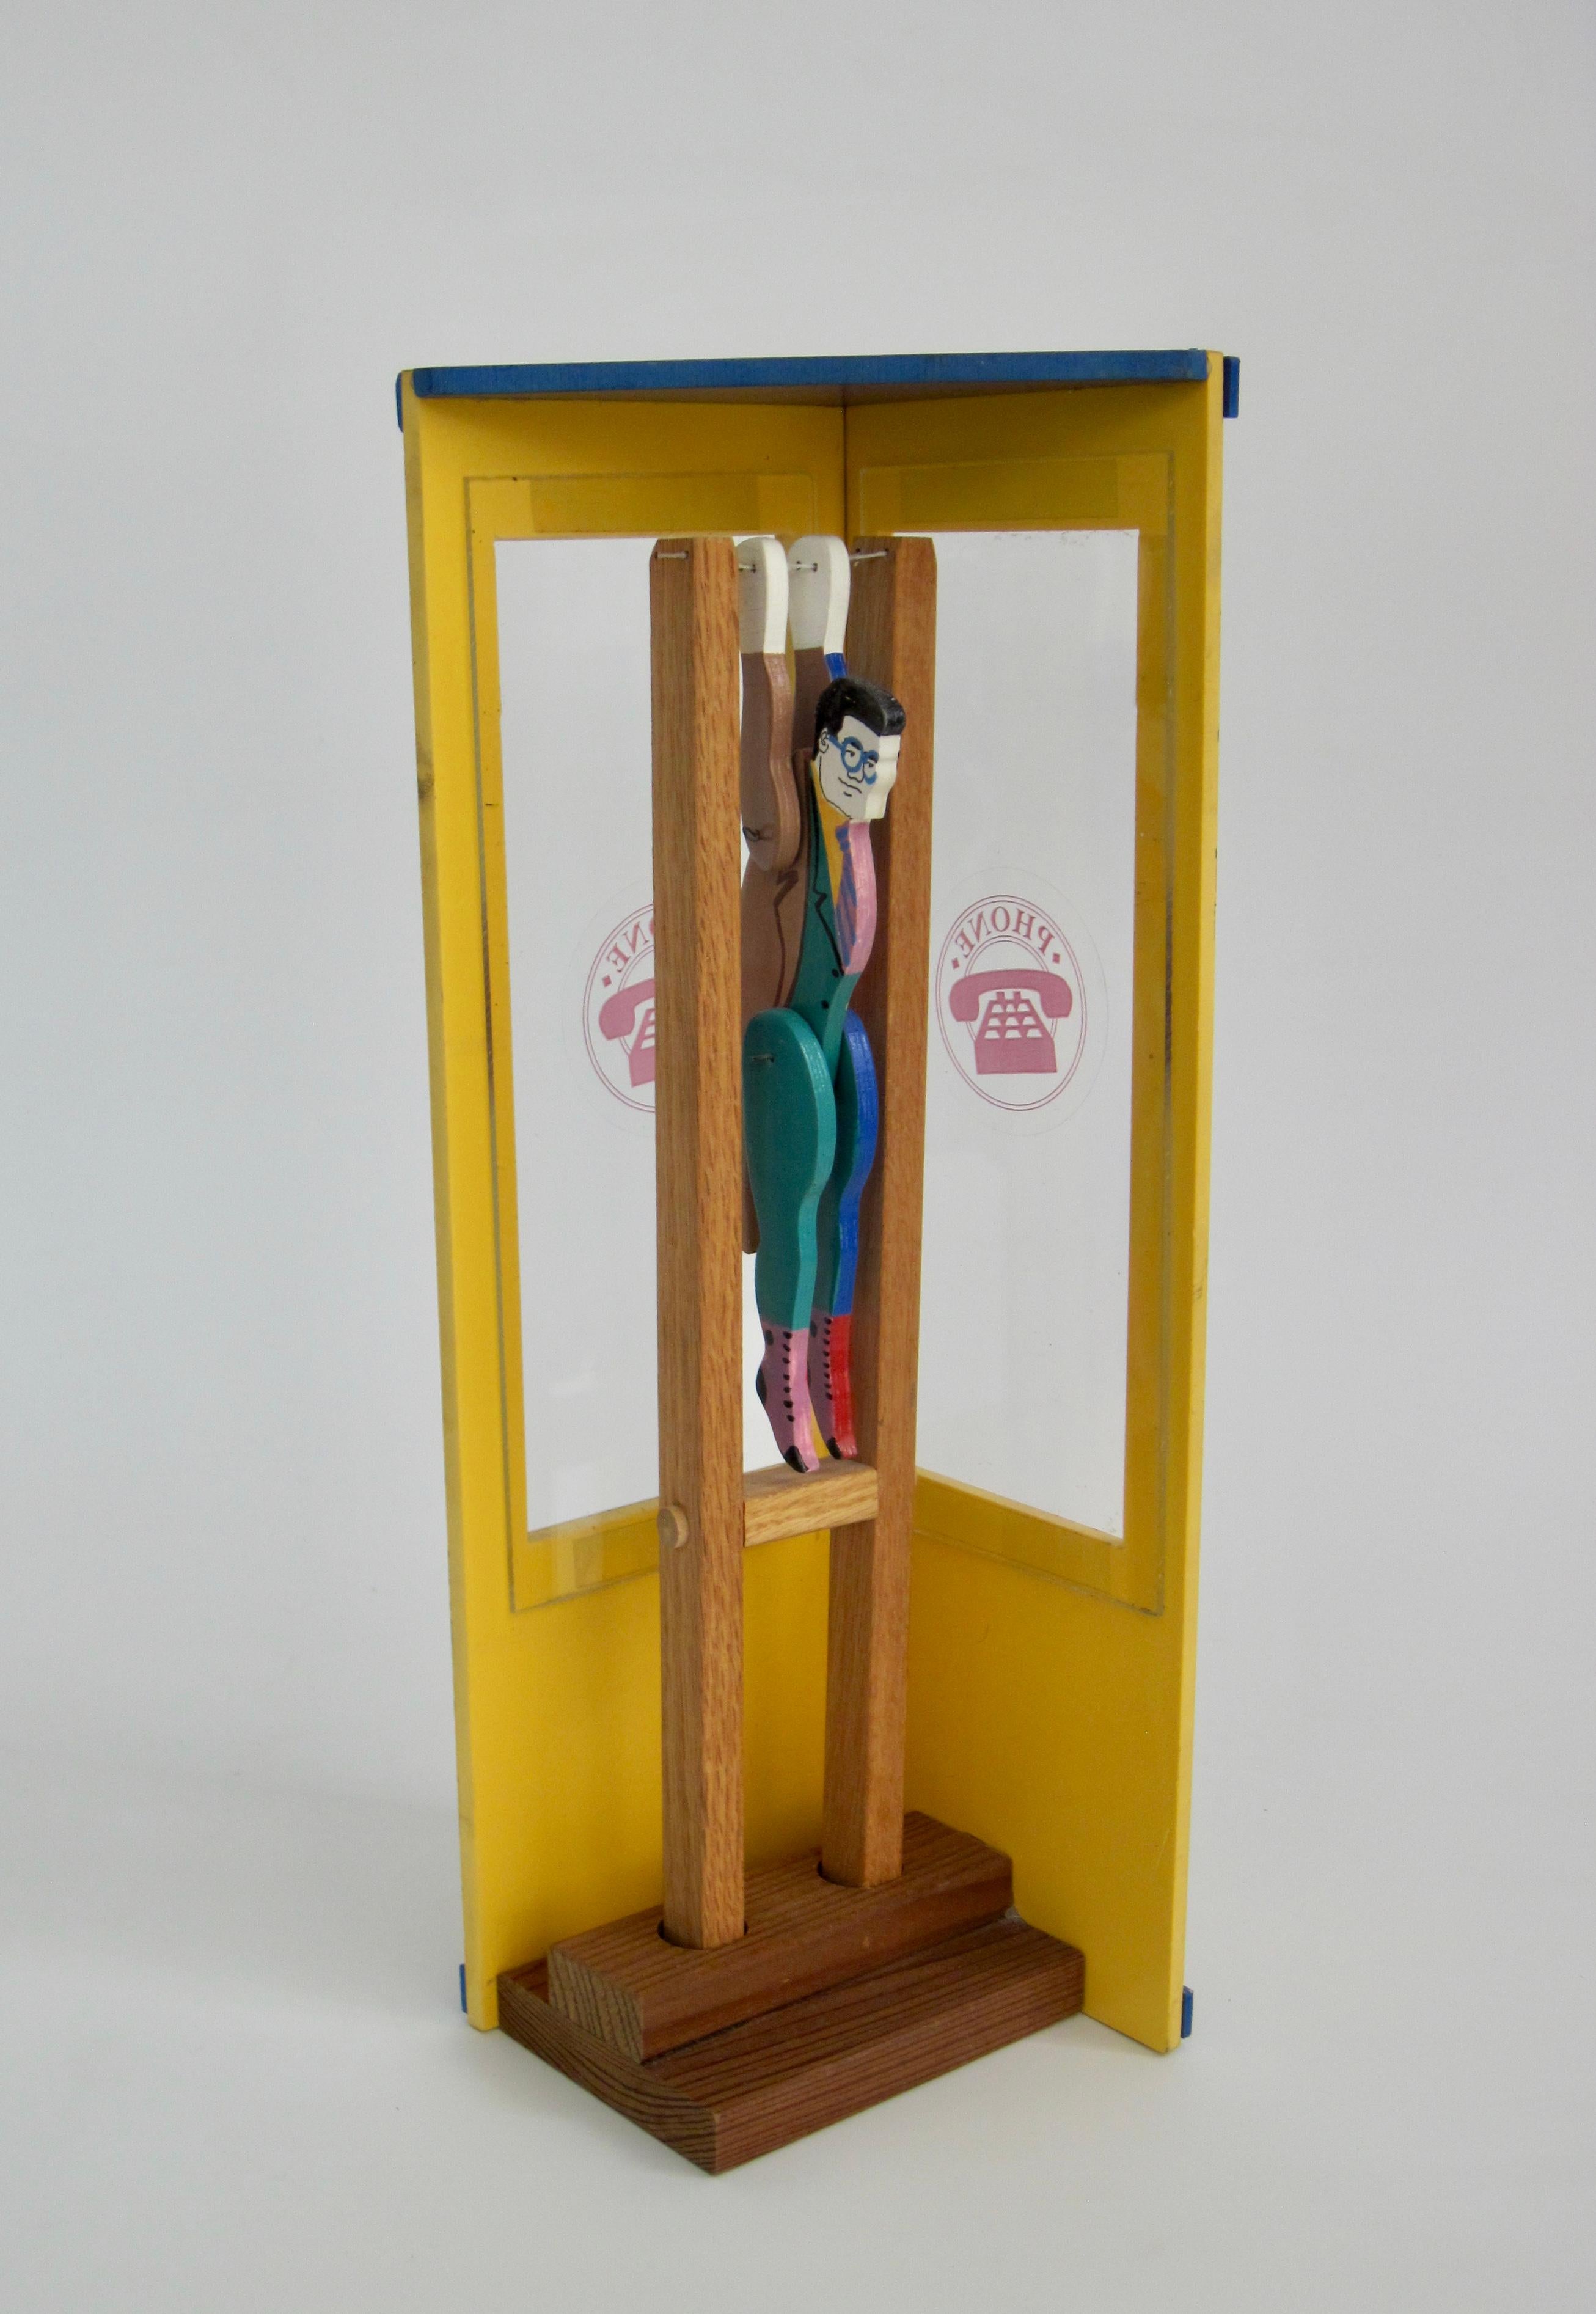 Superman/Clark Kent Wooden Trapeze Artist Toy with Graffiti Phone Booth In Good Condition For Sale In Ferndale, MI